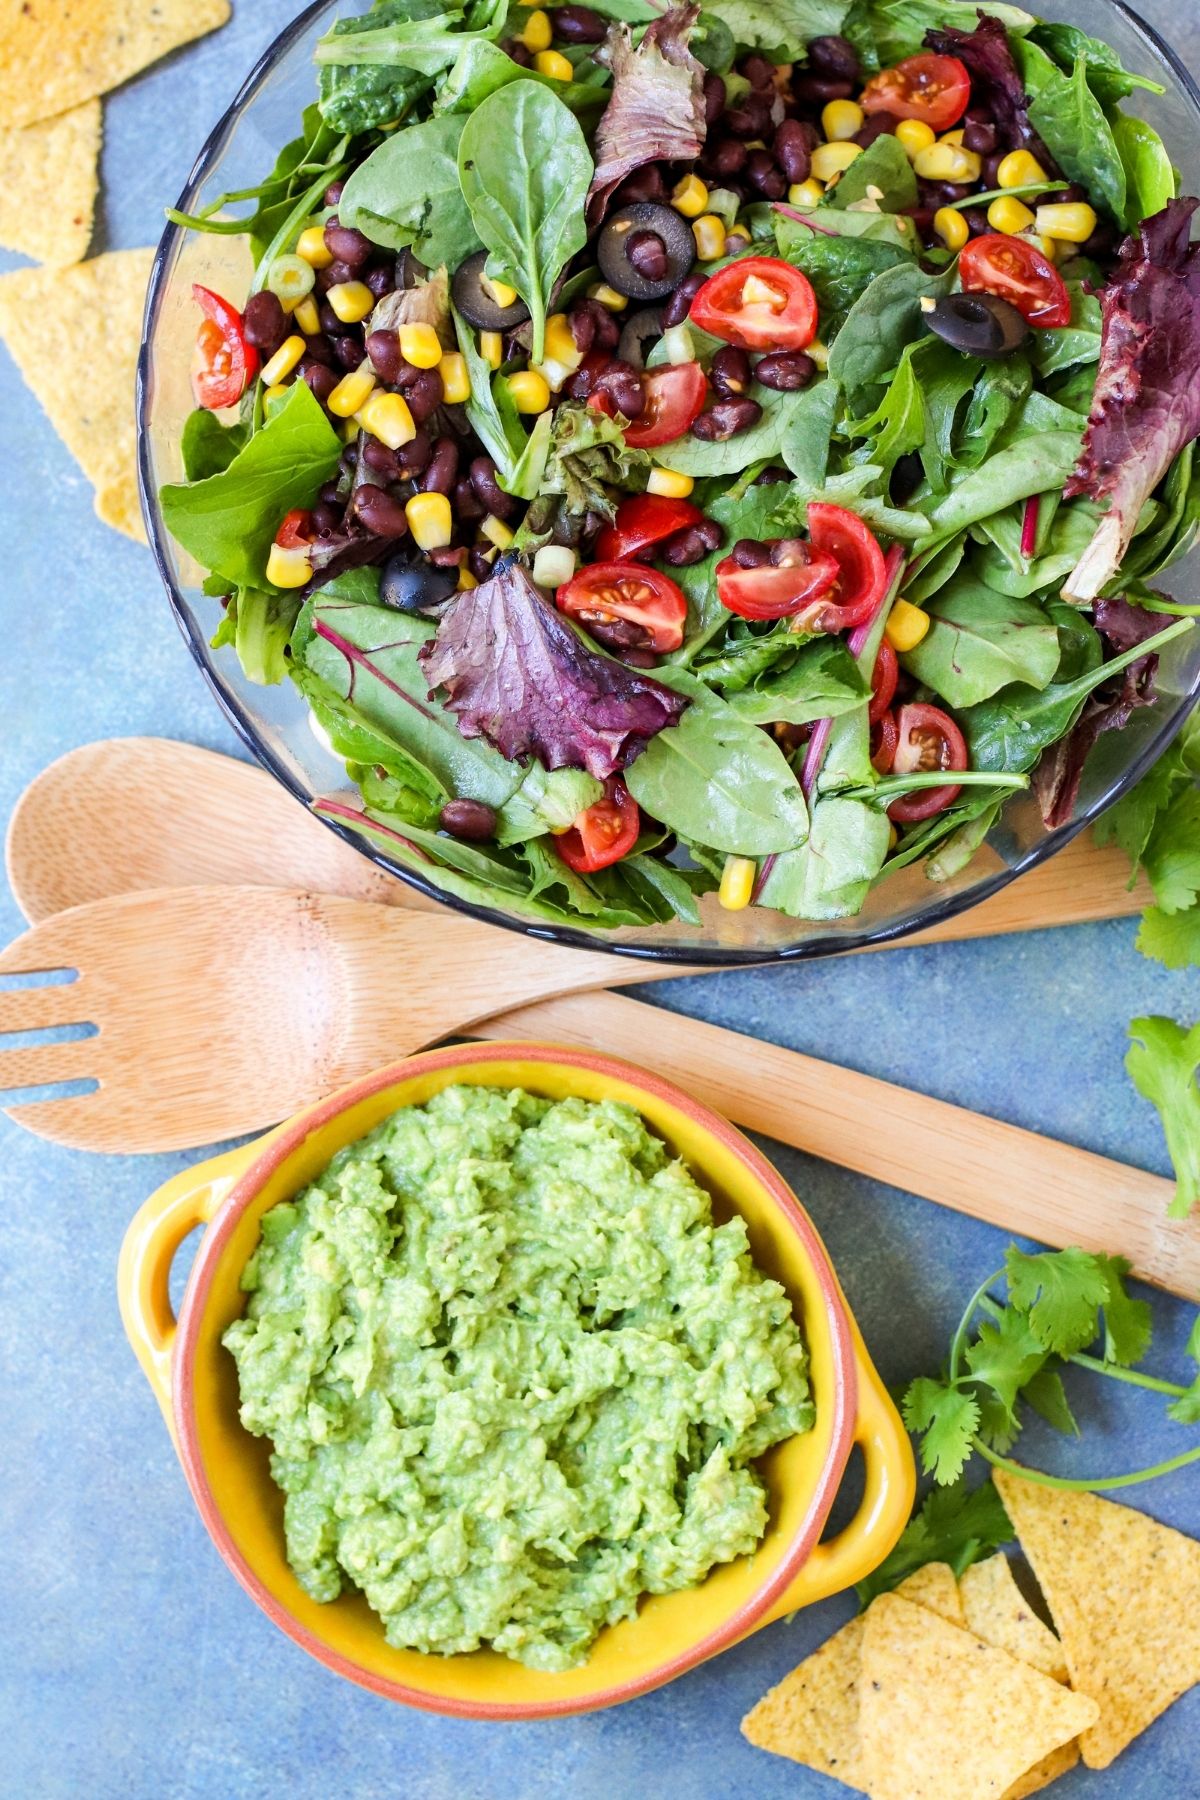 Large bowl of salad ingredients next to salad serving spoons and small bowl of guacamole